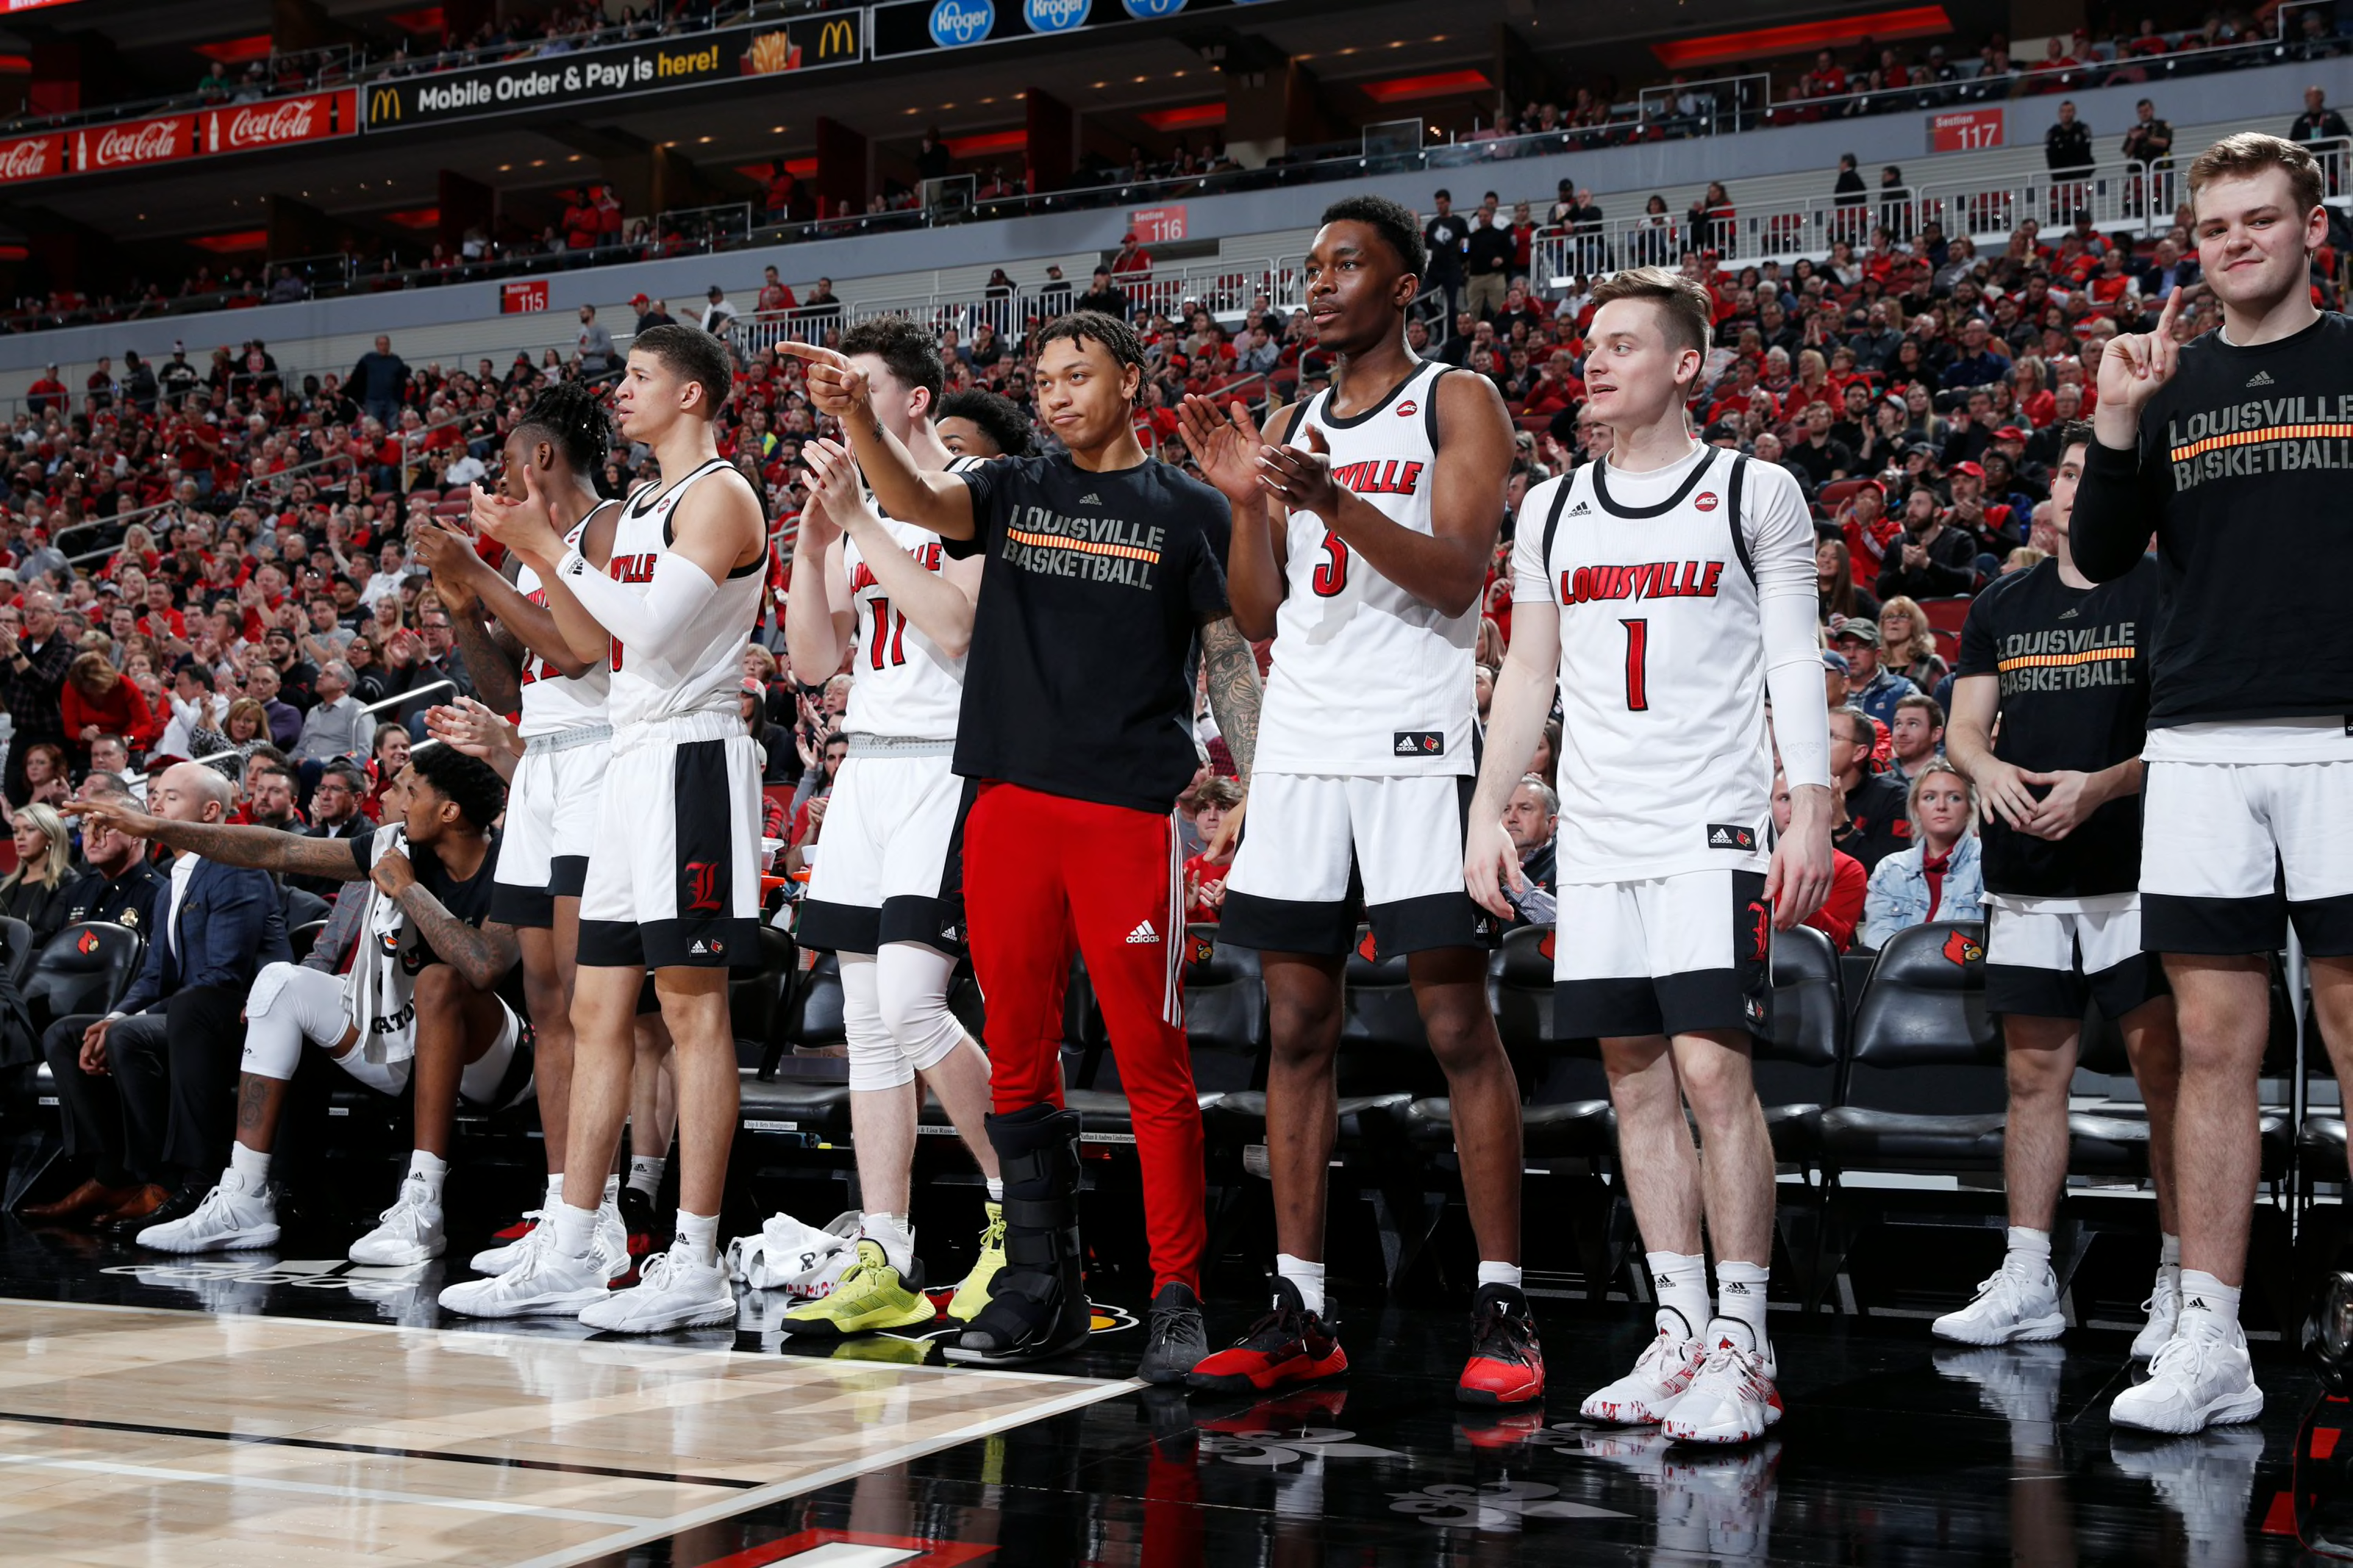 Louisville basketball: Projected 2020-21 starting lineup 1.0 - Page 5